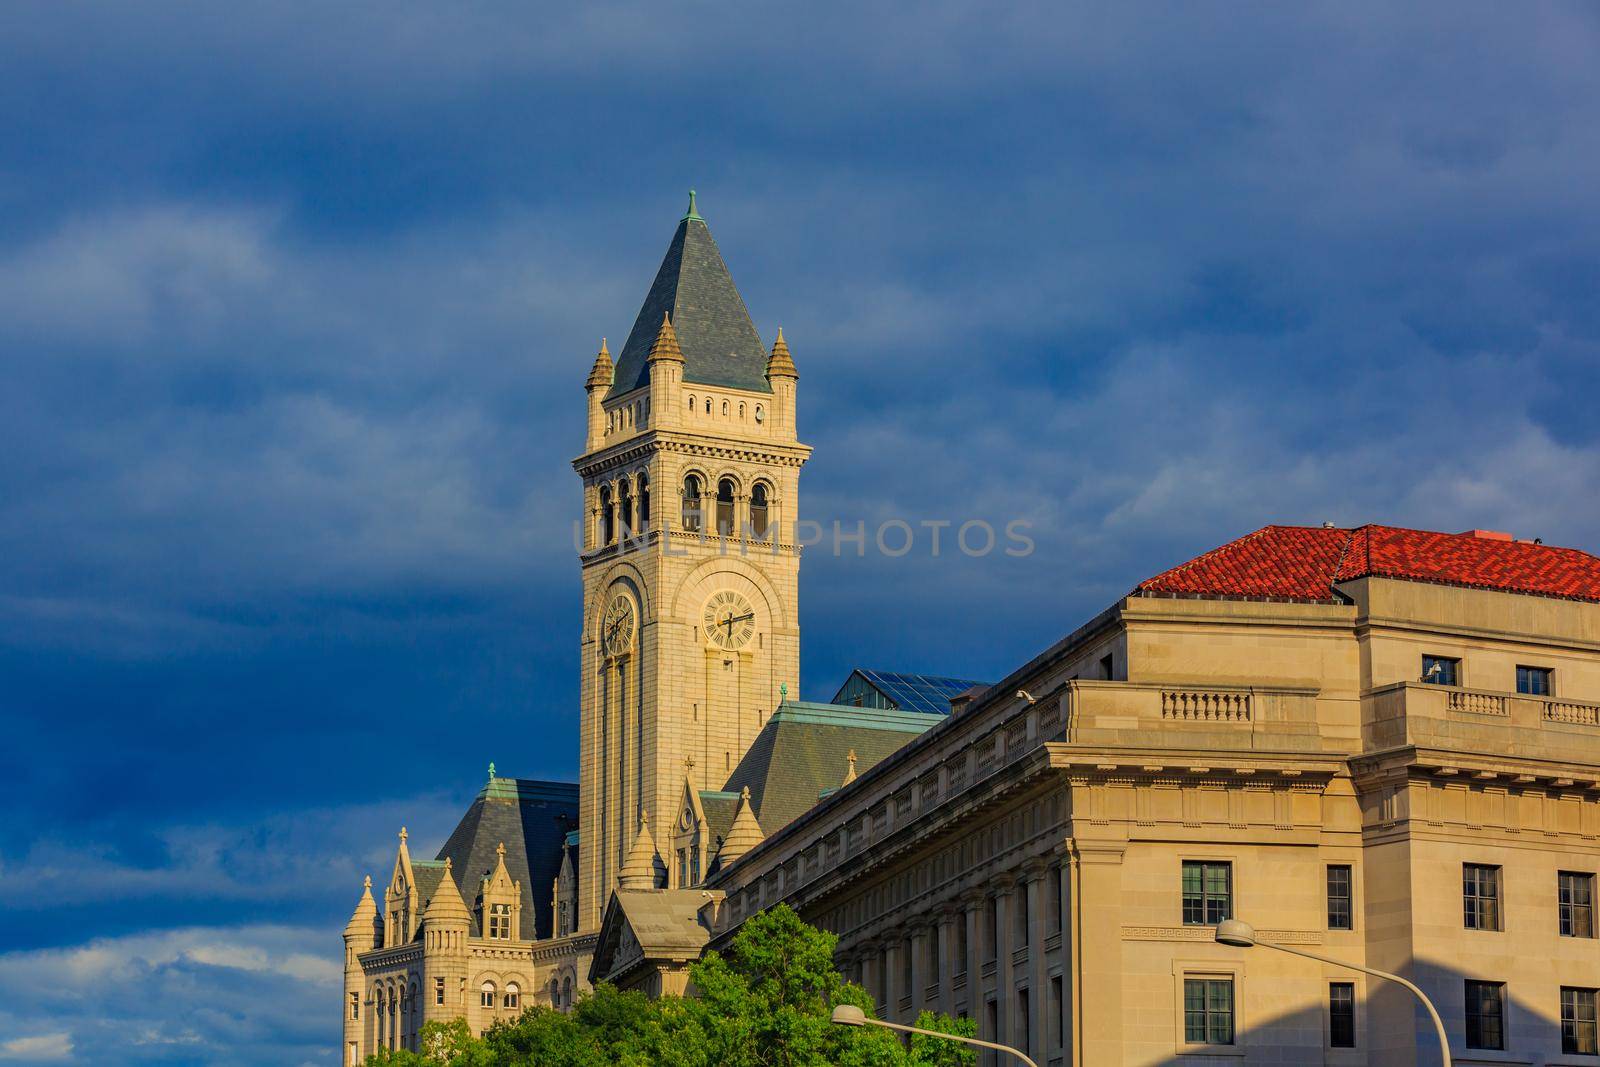 Old Post Office and Clock Tower by gepeng